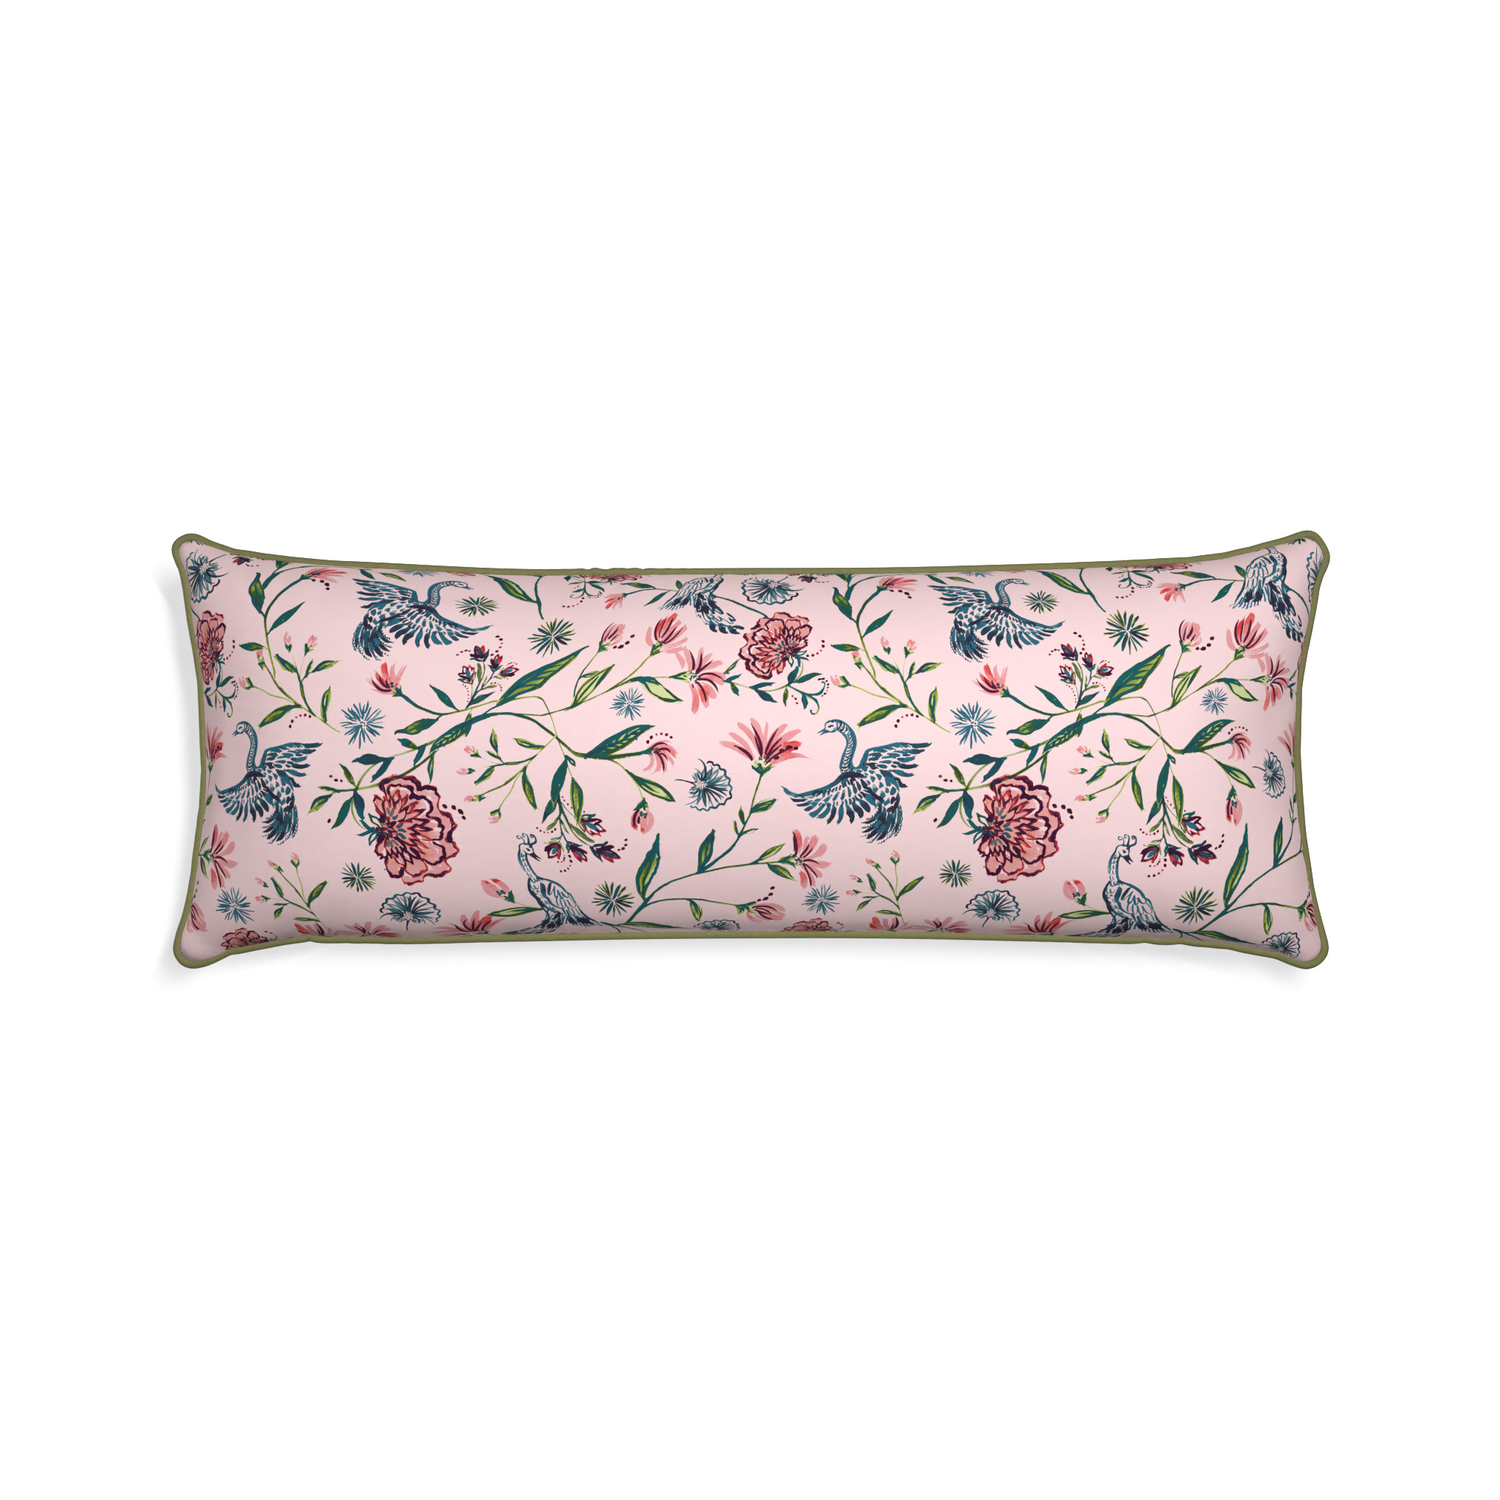 Xl-lumbar daphne rose custom rose chinoiseriepillow with moss piping on white background